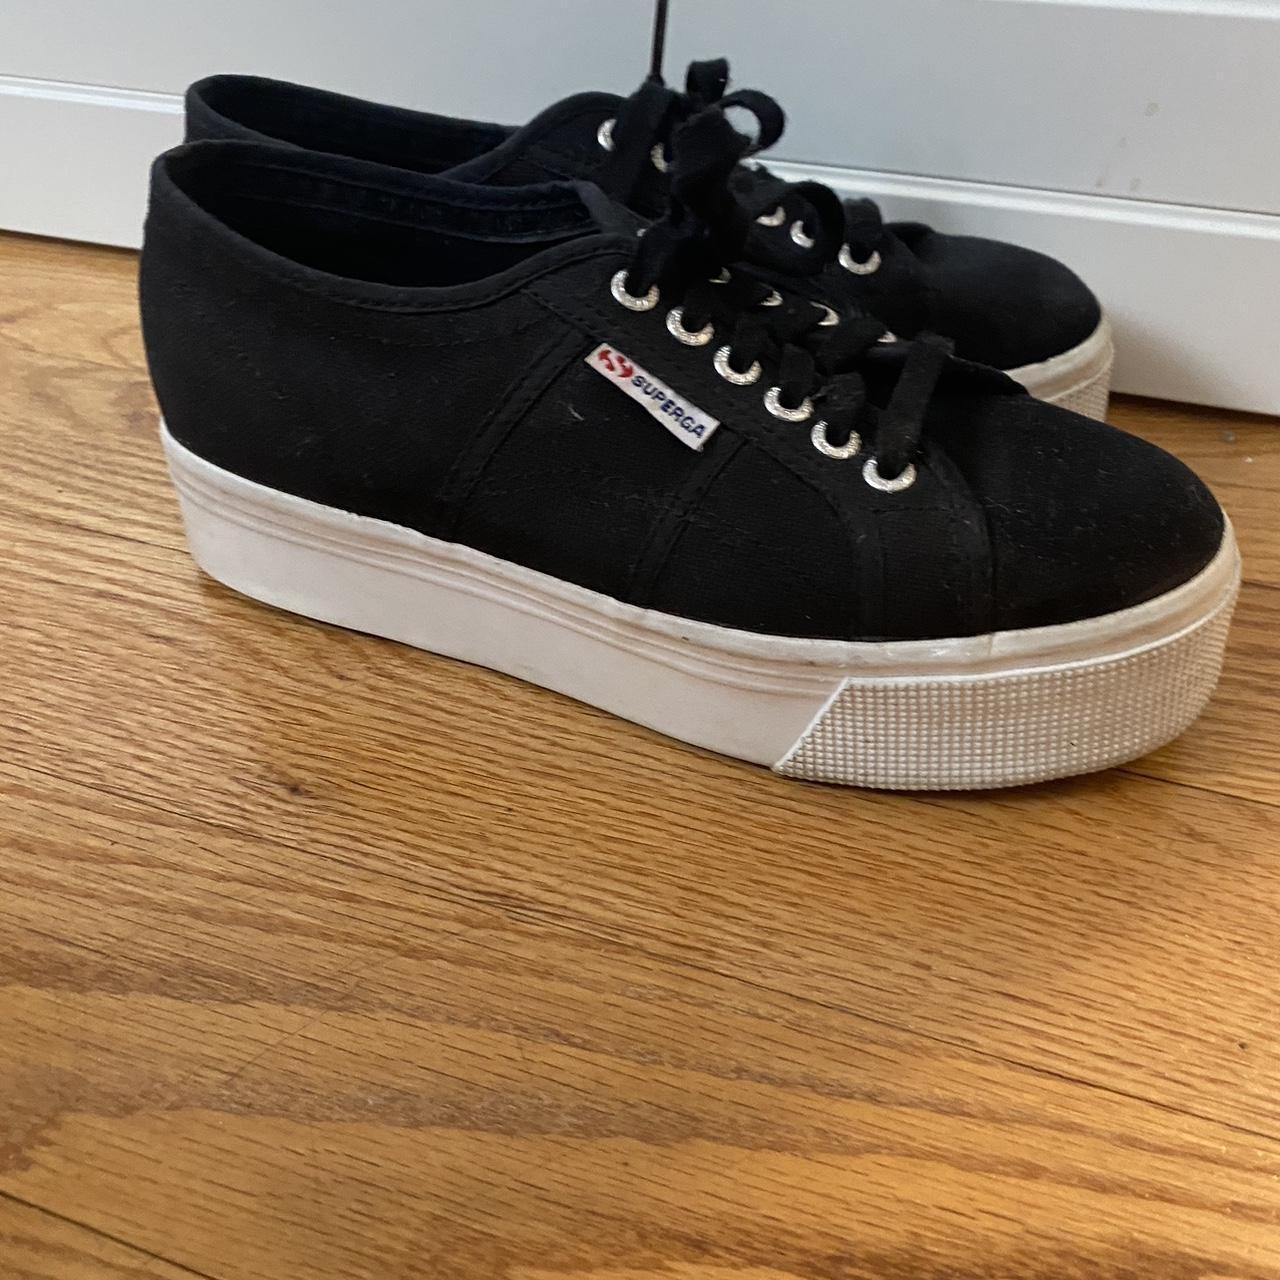 Superga Women's Black and White Trainers | Depop